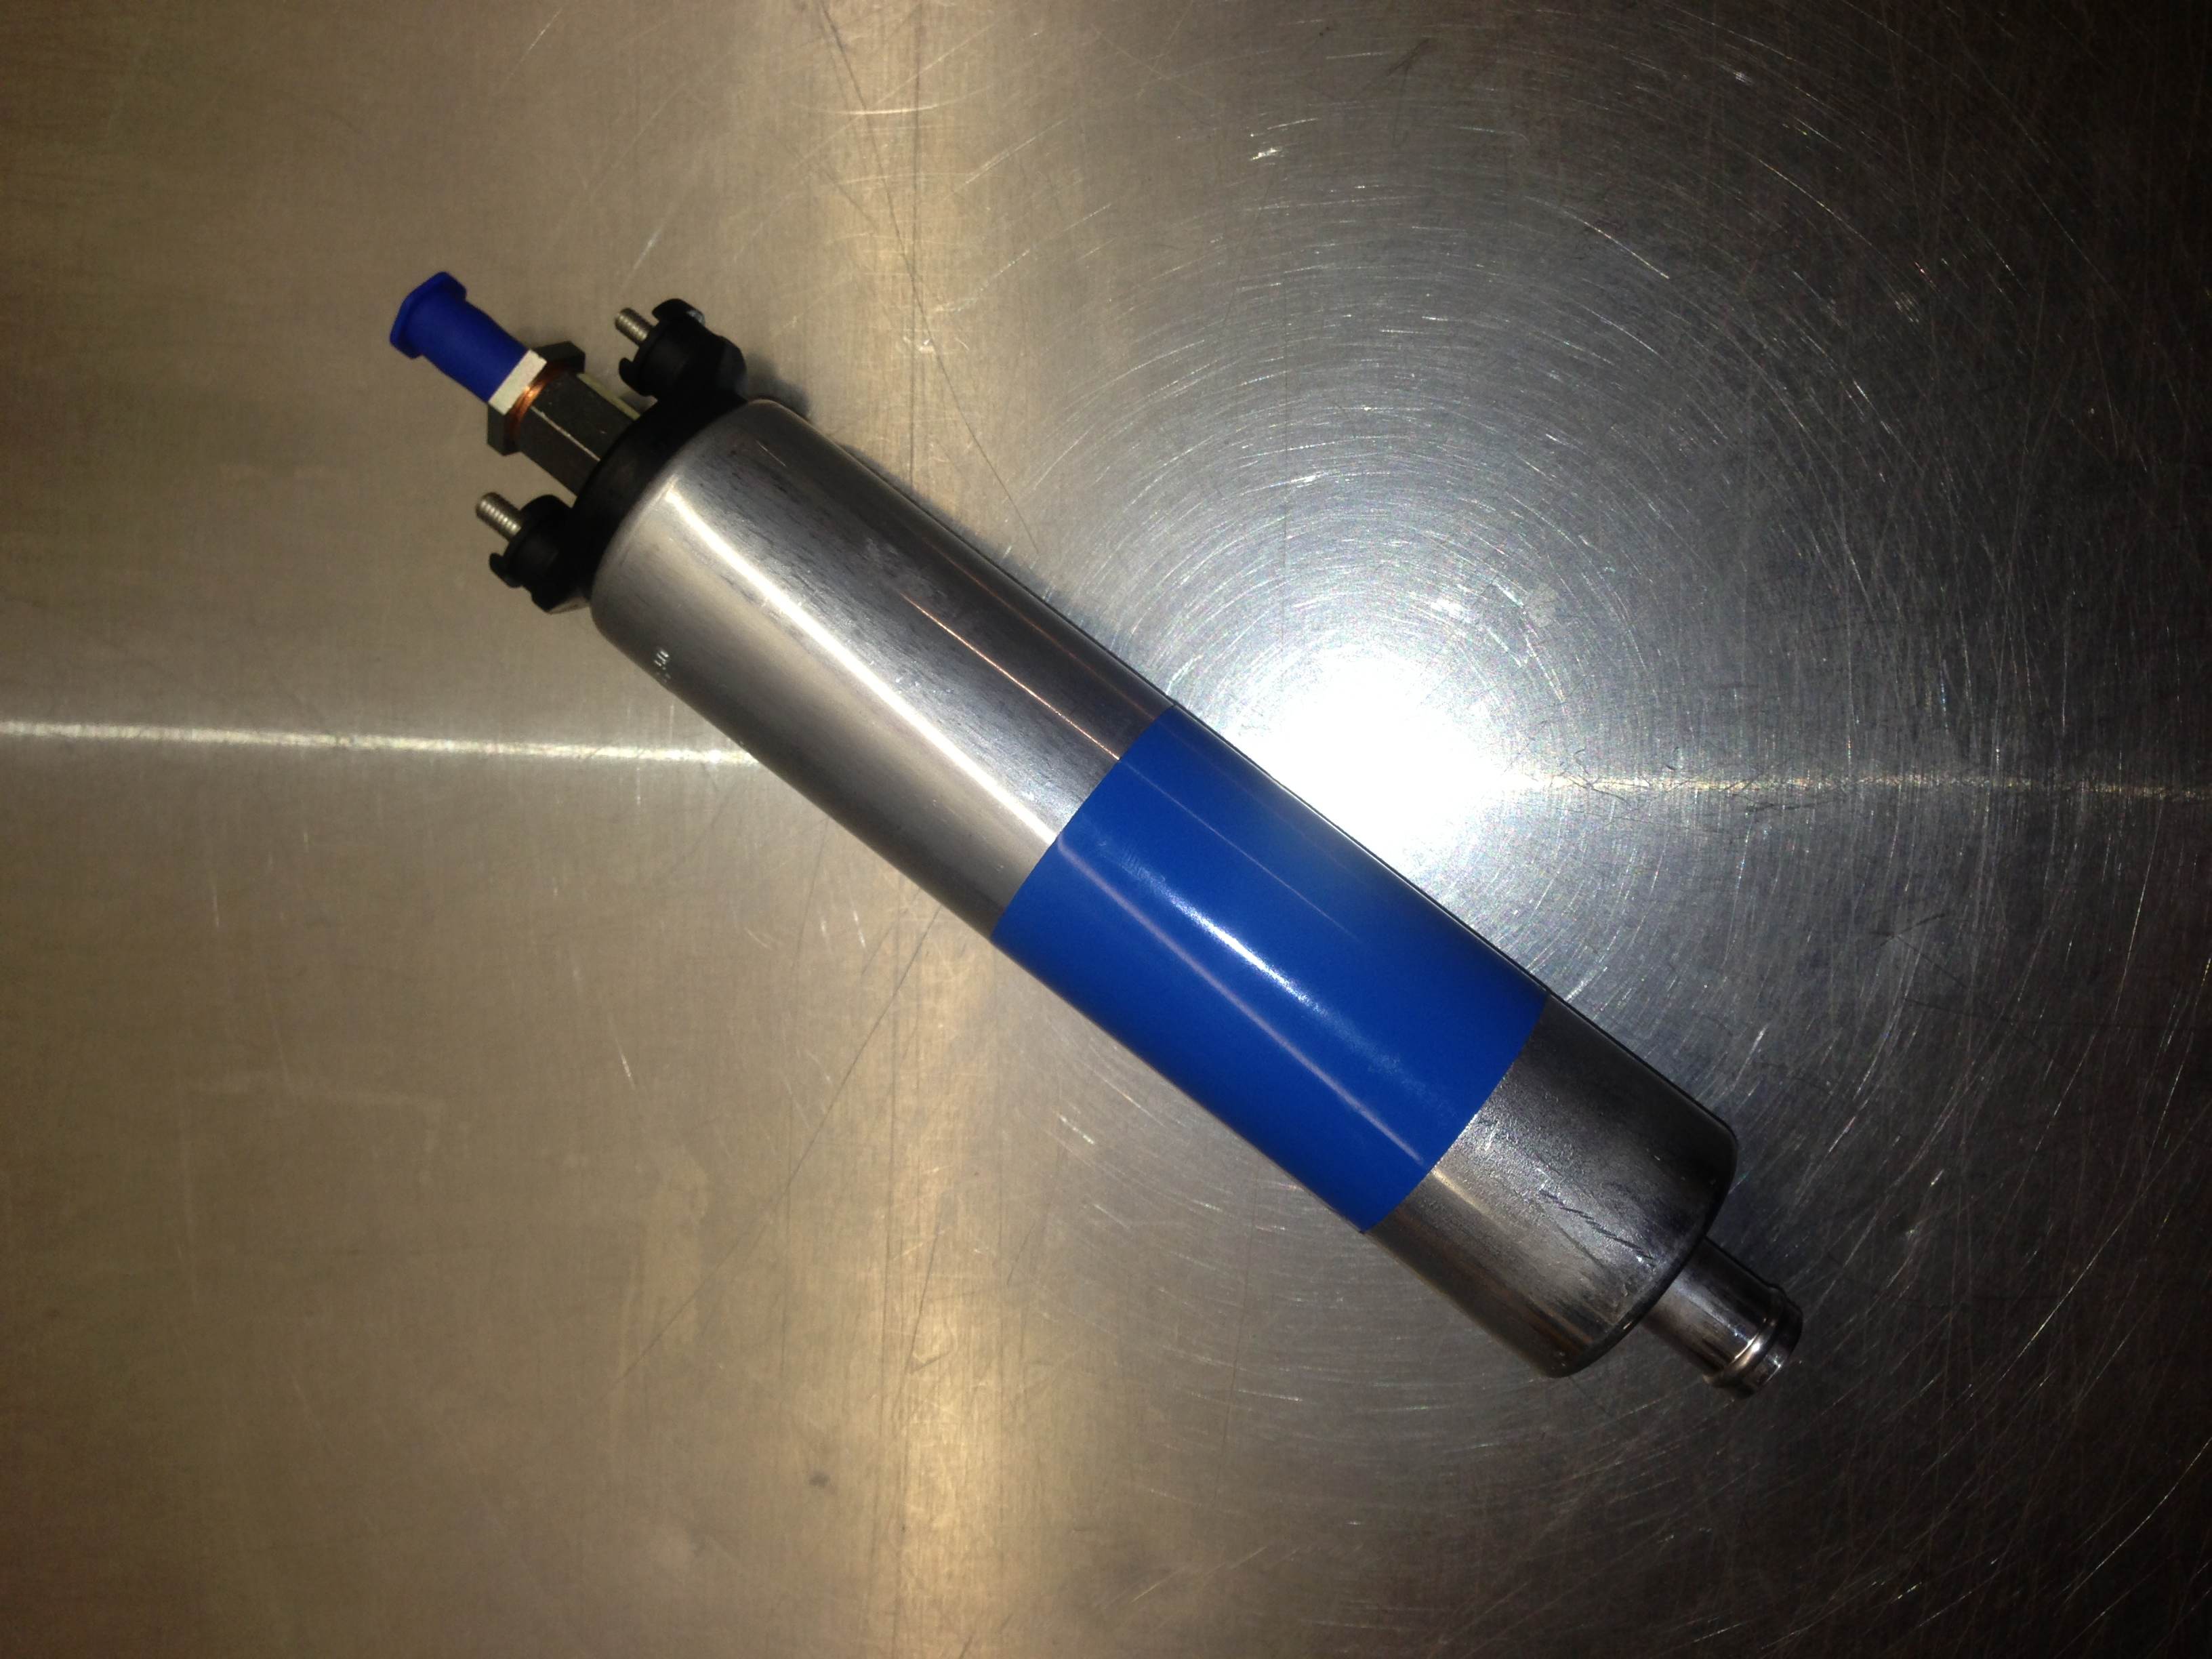 Jay Racing Pro Series L3LM "Veyron" Screw Style Fuel Pump